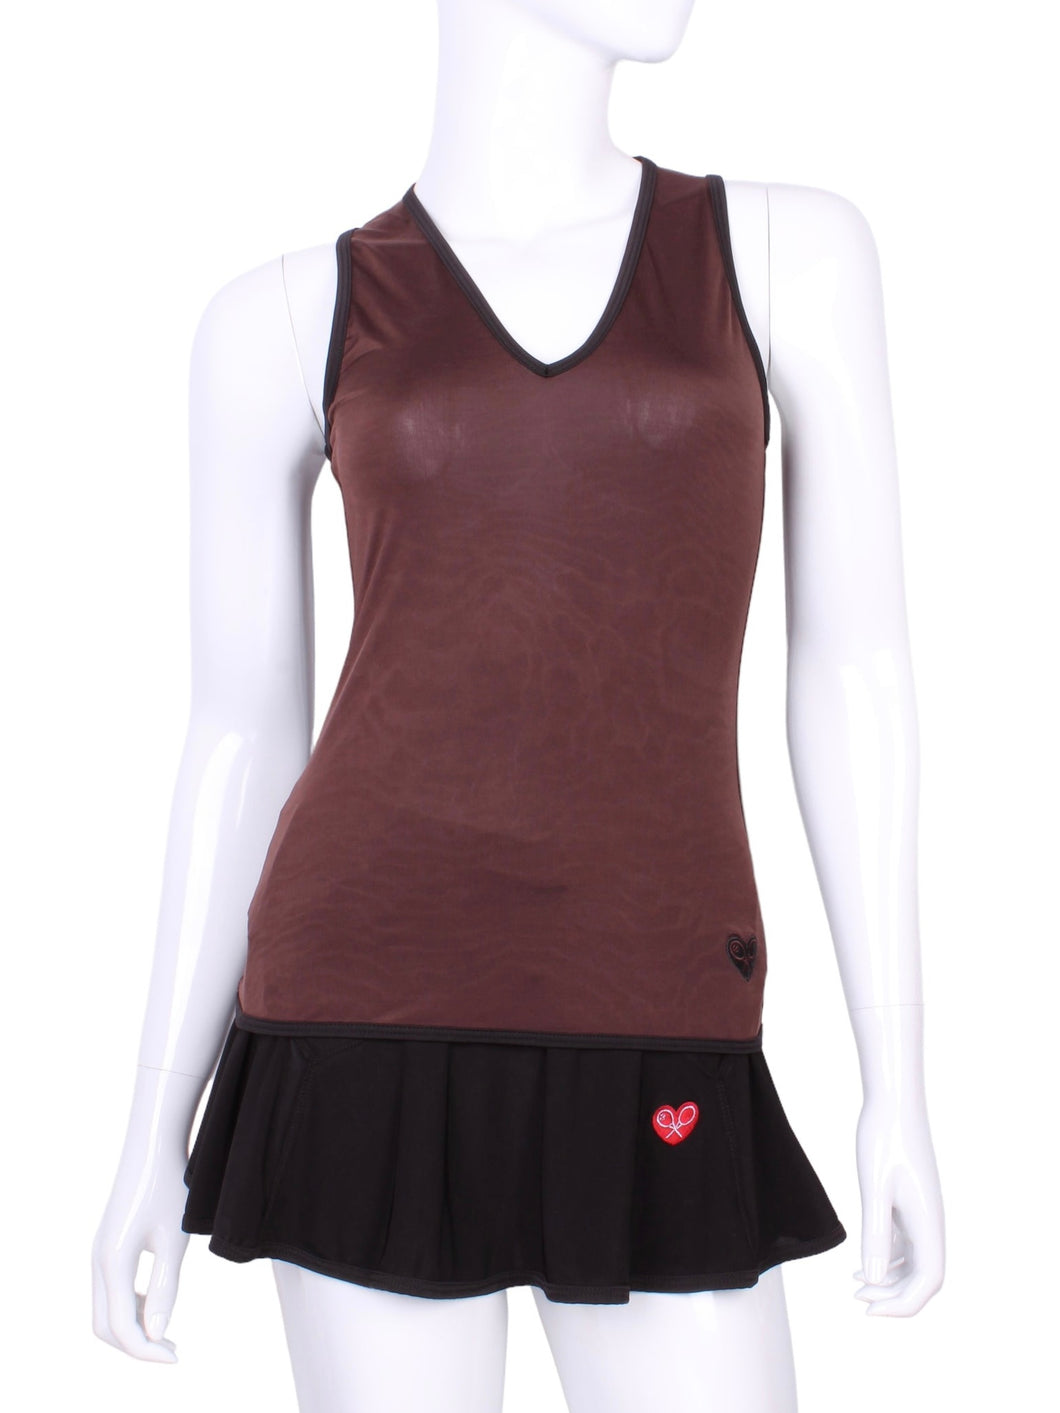 The simply elegant Vee Tank has a little vee in the front and a straight back.  Designed by a tennis player for comfort AND luxury - the pattern is made for a real woman’s body with curves and all!  The fabric is stretchy and soft.  As with all of our apparel - it’s designed and hand made in Downtown Los Angeles - from silky imported fabric.